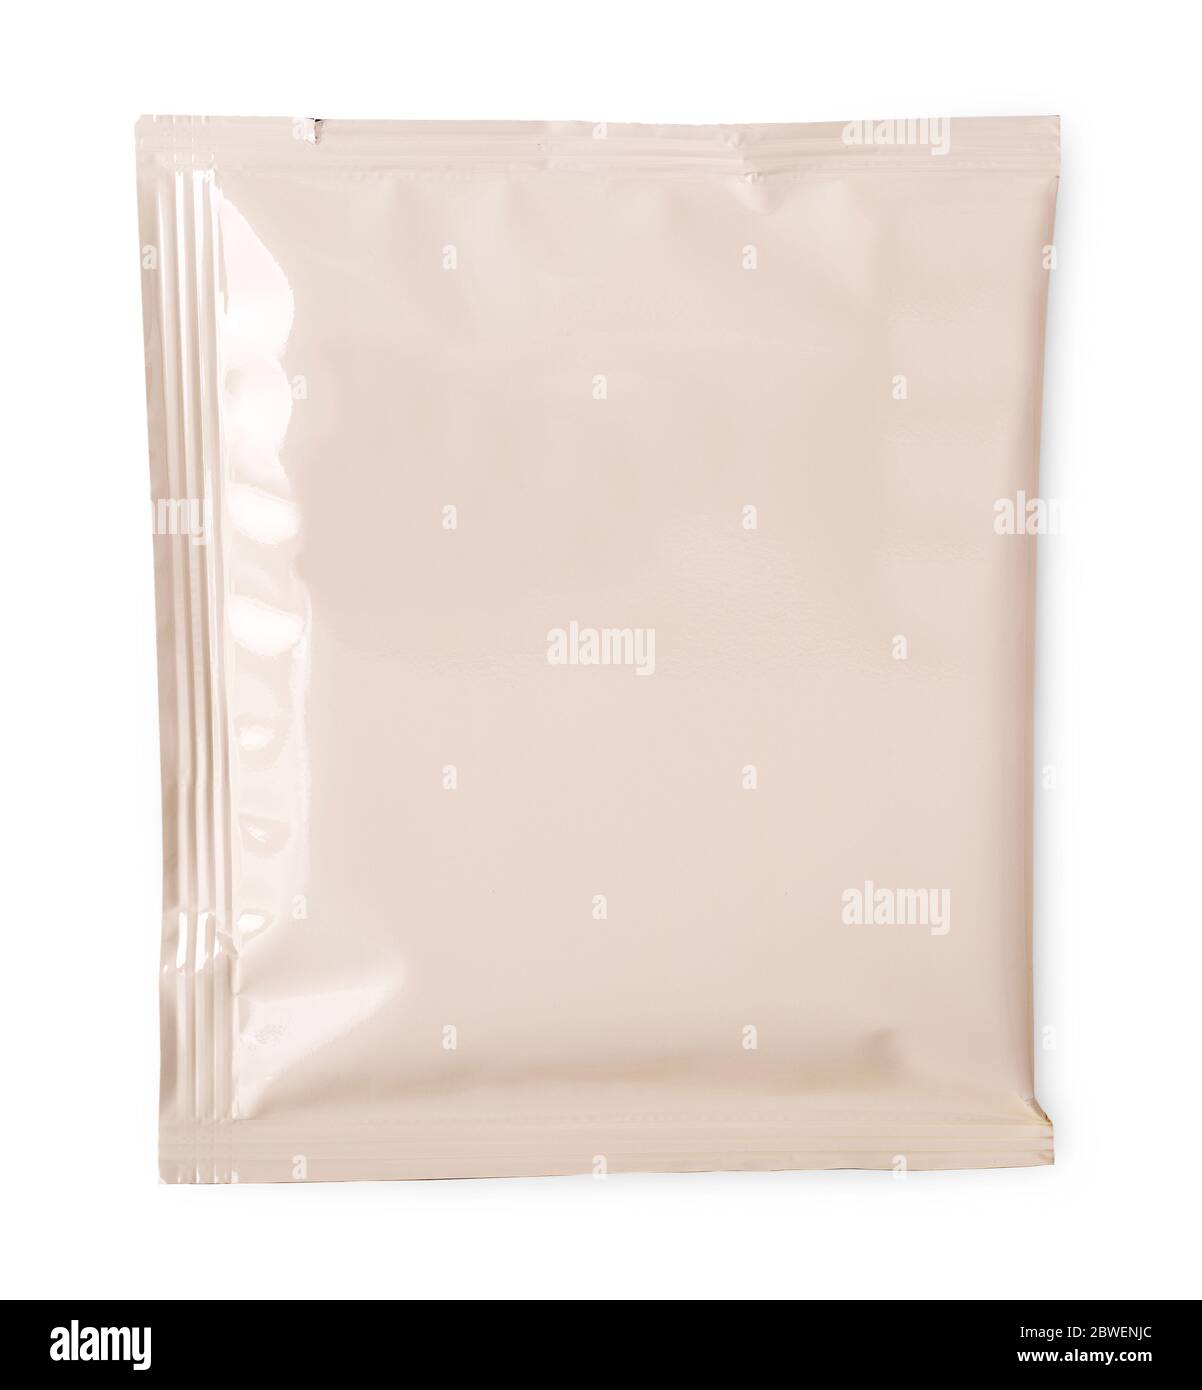 https://c8.alamy.com/comp/2BWENJC/mockup-blank-bag-for-coffee-candy-nuts-spices-self-seal-zip-lock-foil-or-paper-food-pouch-snack-sachet-resealable-packaging-with-clipping-path-2BWENJC.jpg